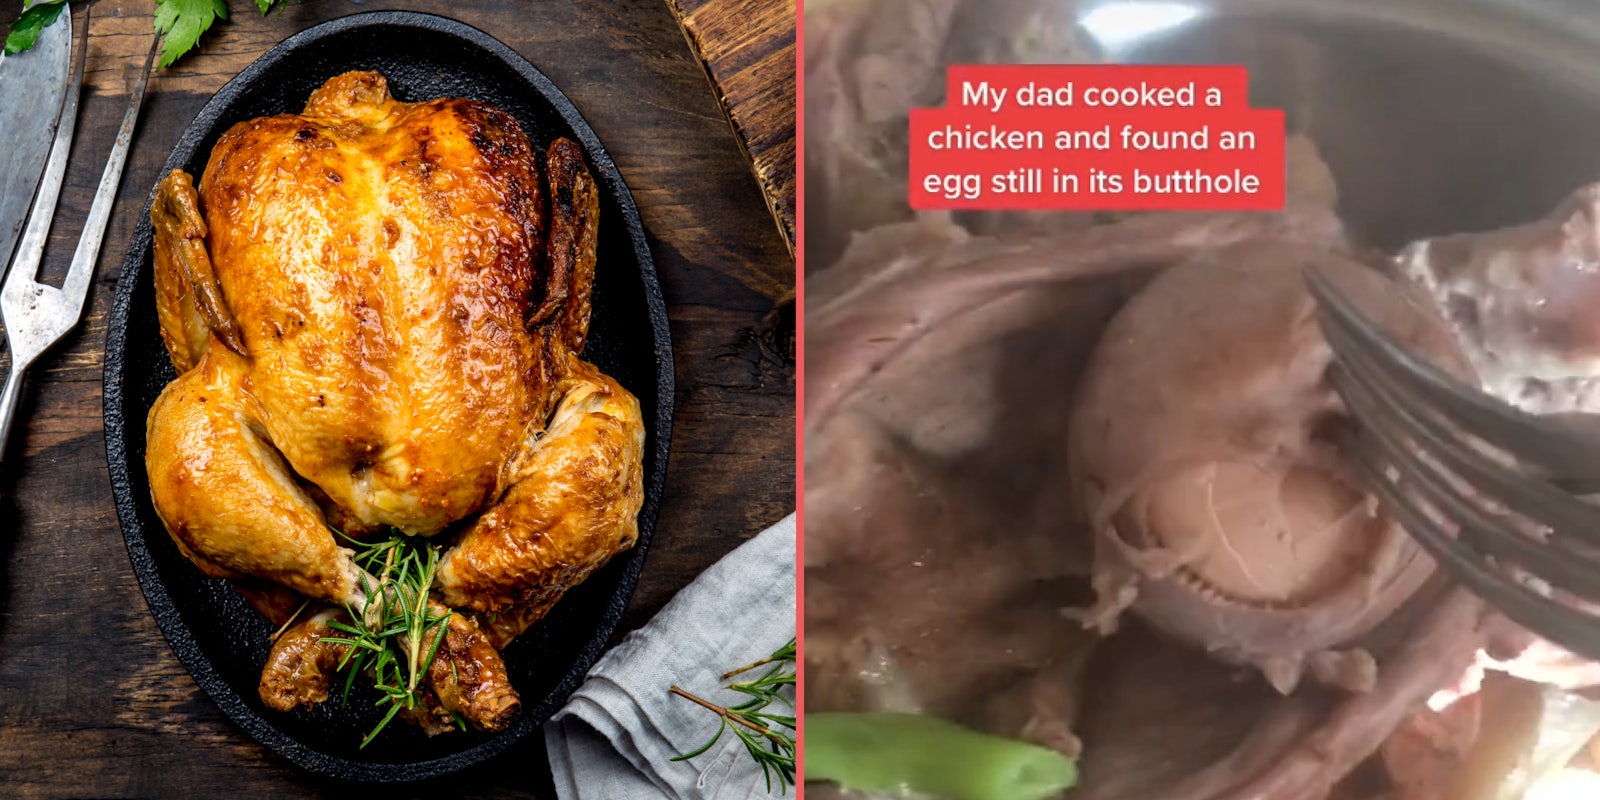 Whole chicken in pan on table cooked (l) Cooked chicken with fork poking egg inside of cooked chicken caption 'My dad cooked a chicken and found an egg still in its butthole' (r)